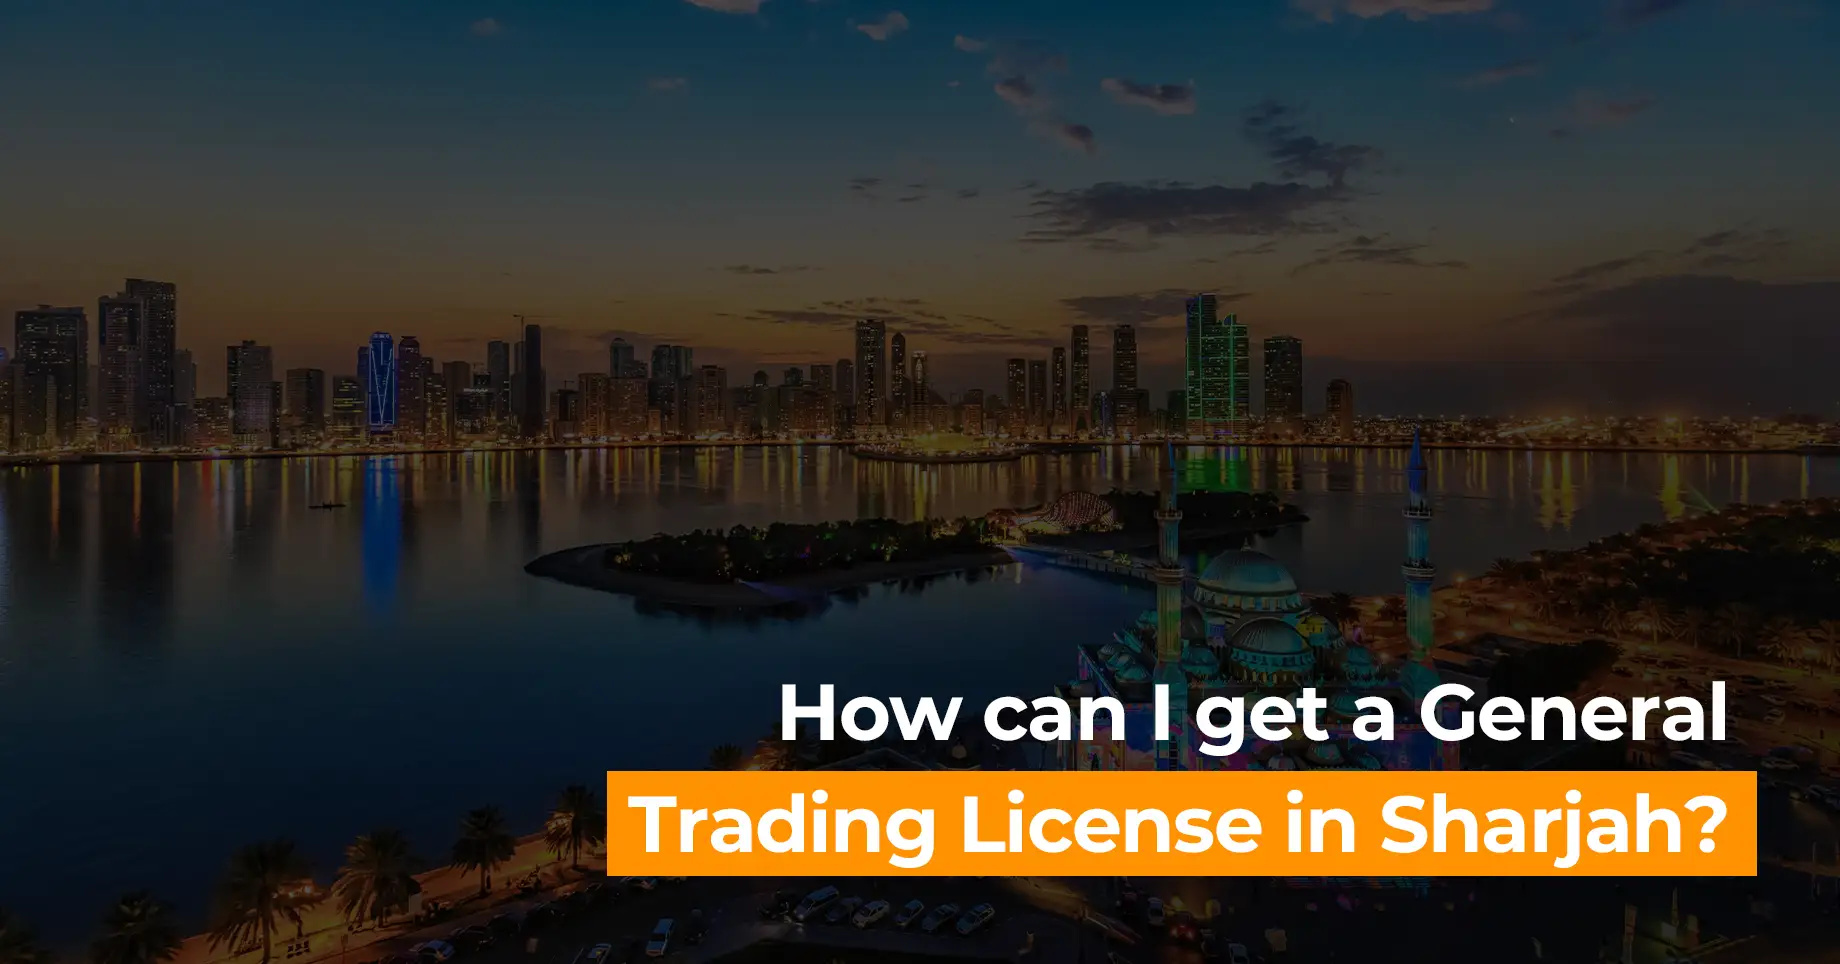 How can I get a General Trading License in Sharjah?